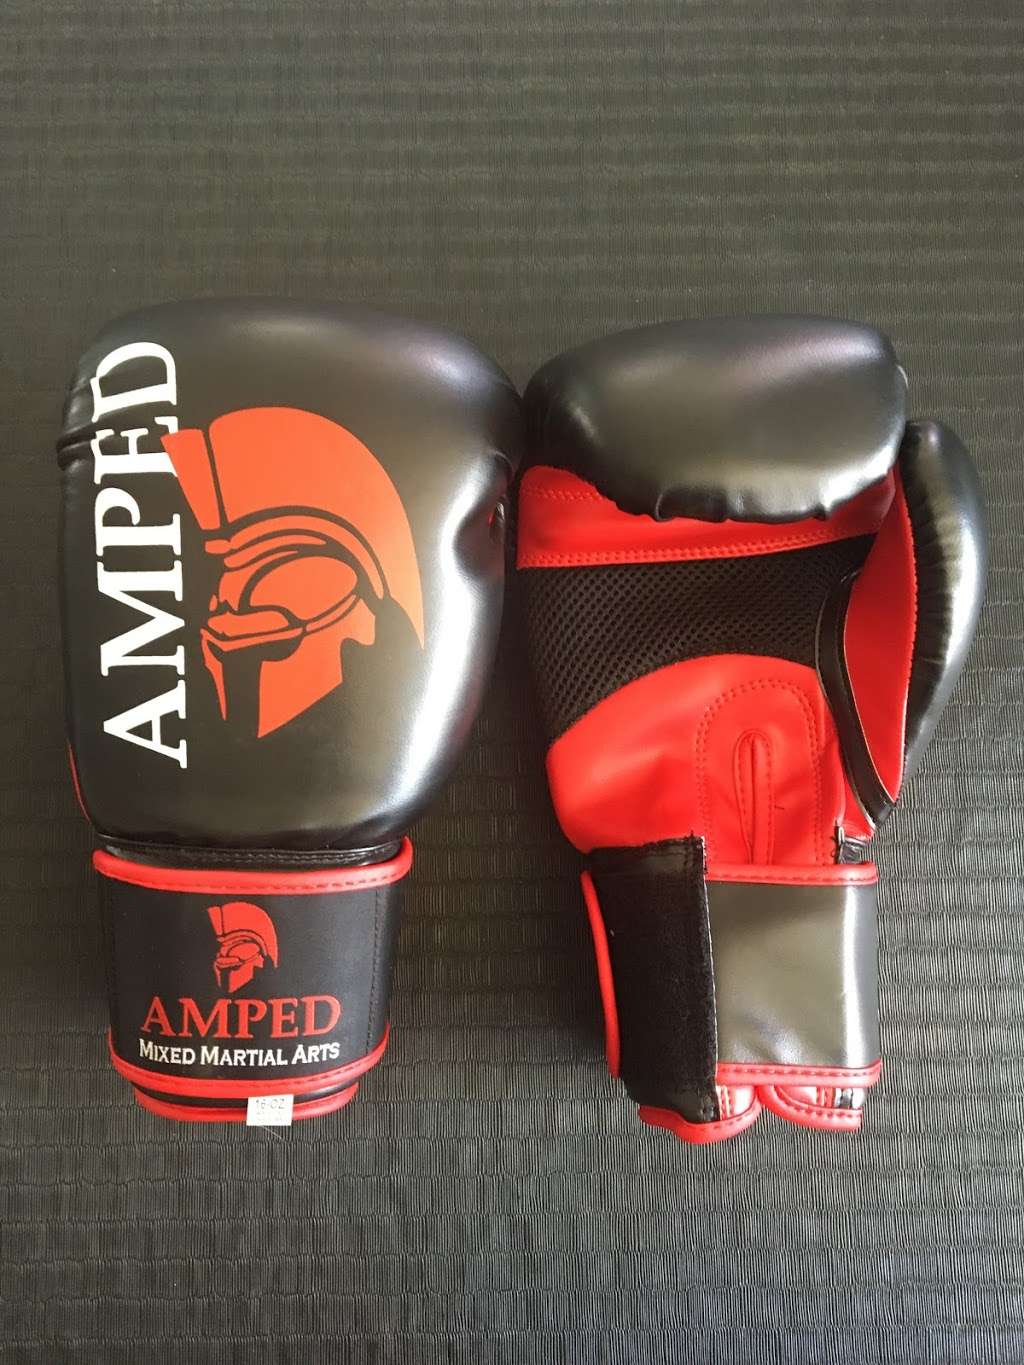 AMPED MIXED MARTIAL ARTS & WRESTLING | 420 Ridgedale Ave, East Hanover, NJ 07936, USA | Phone: (973) 585-6866